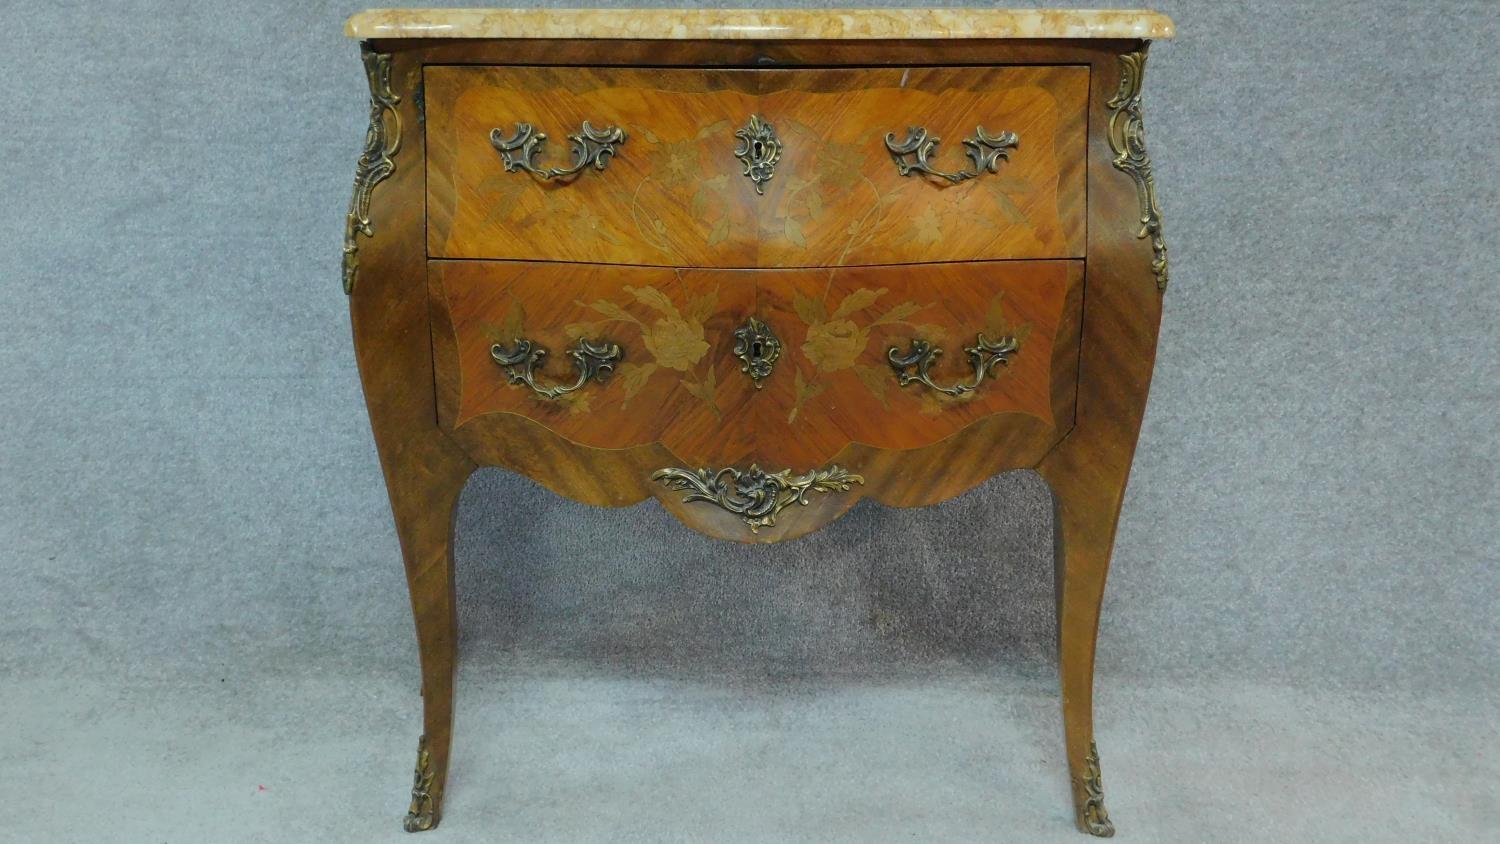 A Louis XV style kingwood marquetry floral and foliate inlaid commode with moulded marble top